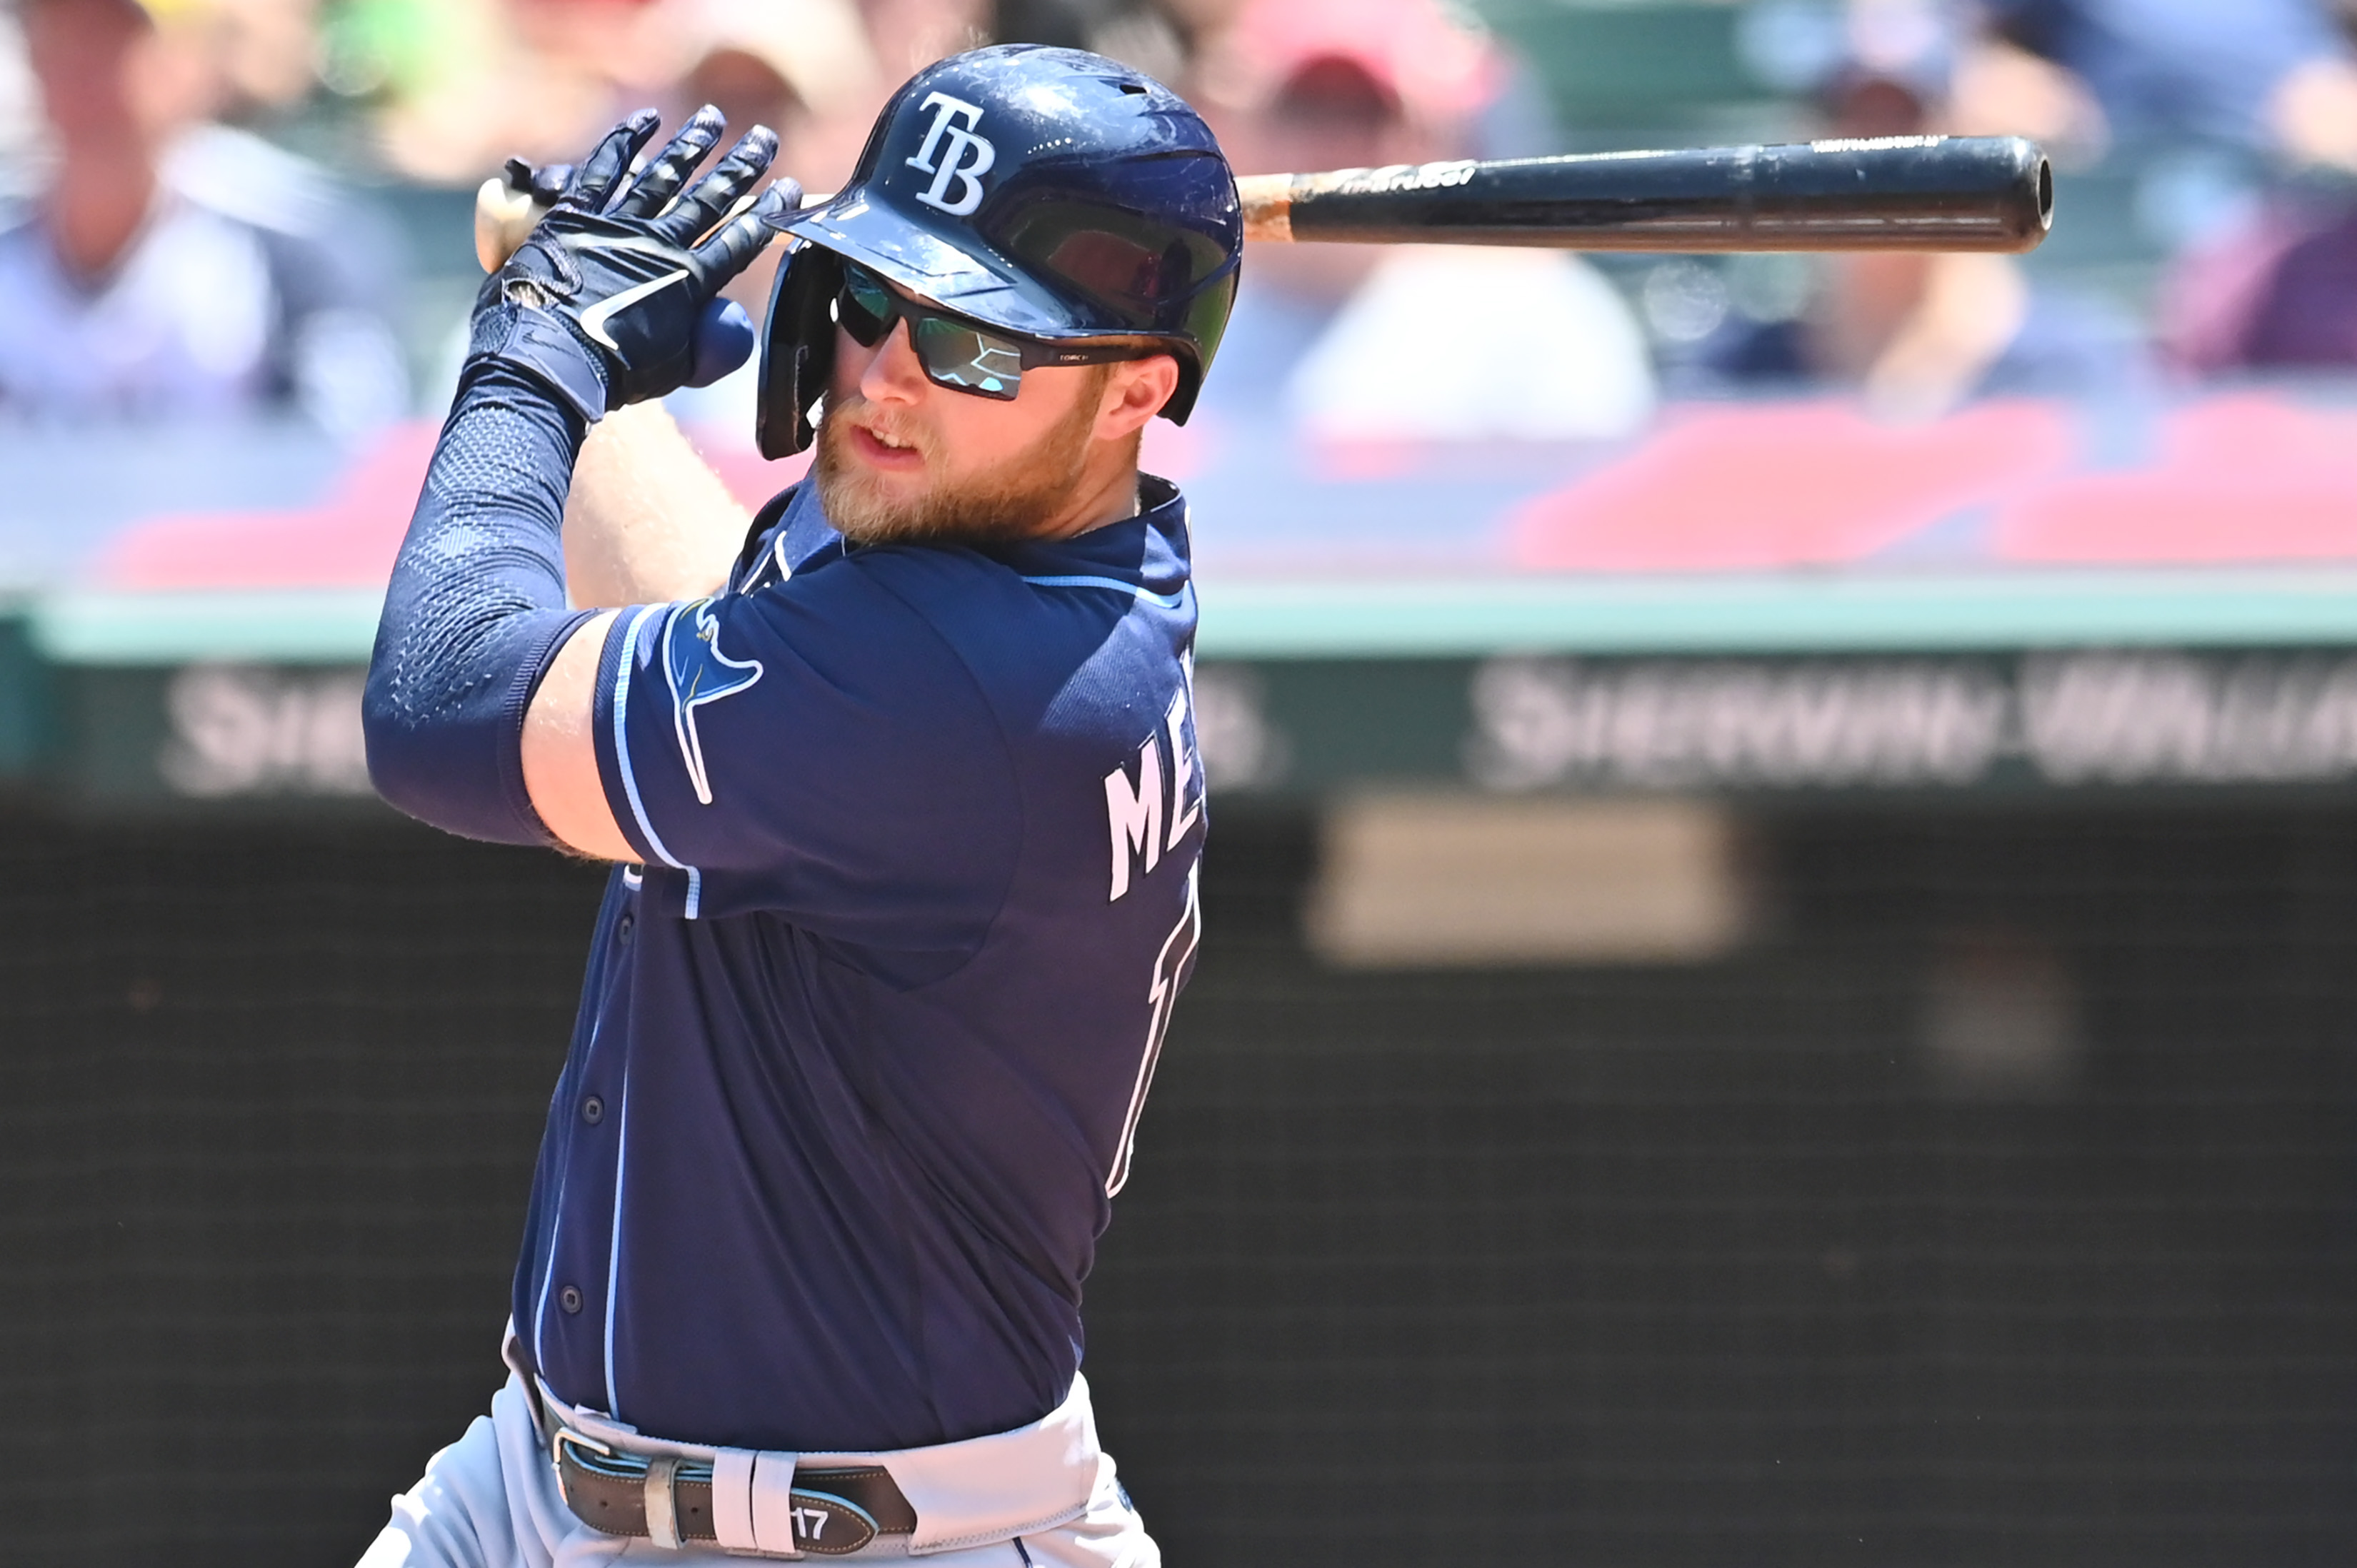 Tigers acquire OF Austin Meadows from the Tampa Bay Rays - Bless You Boys